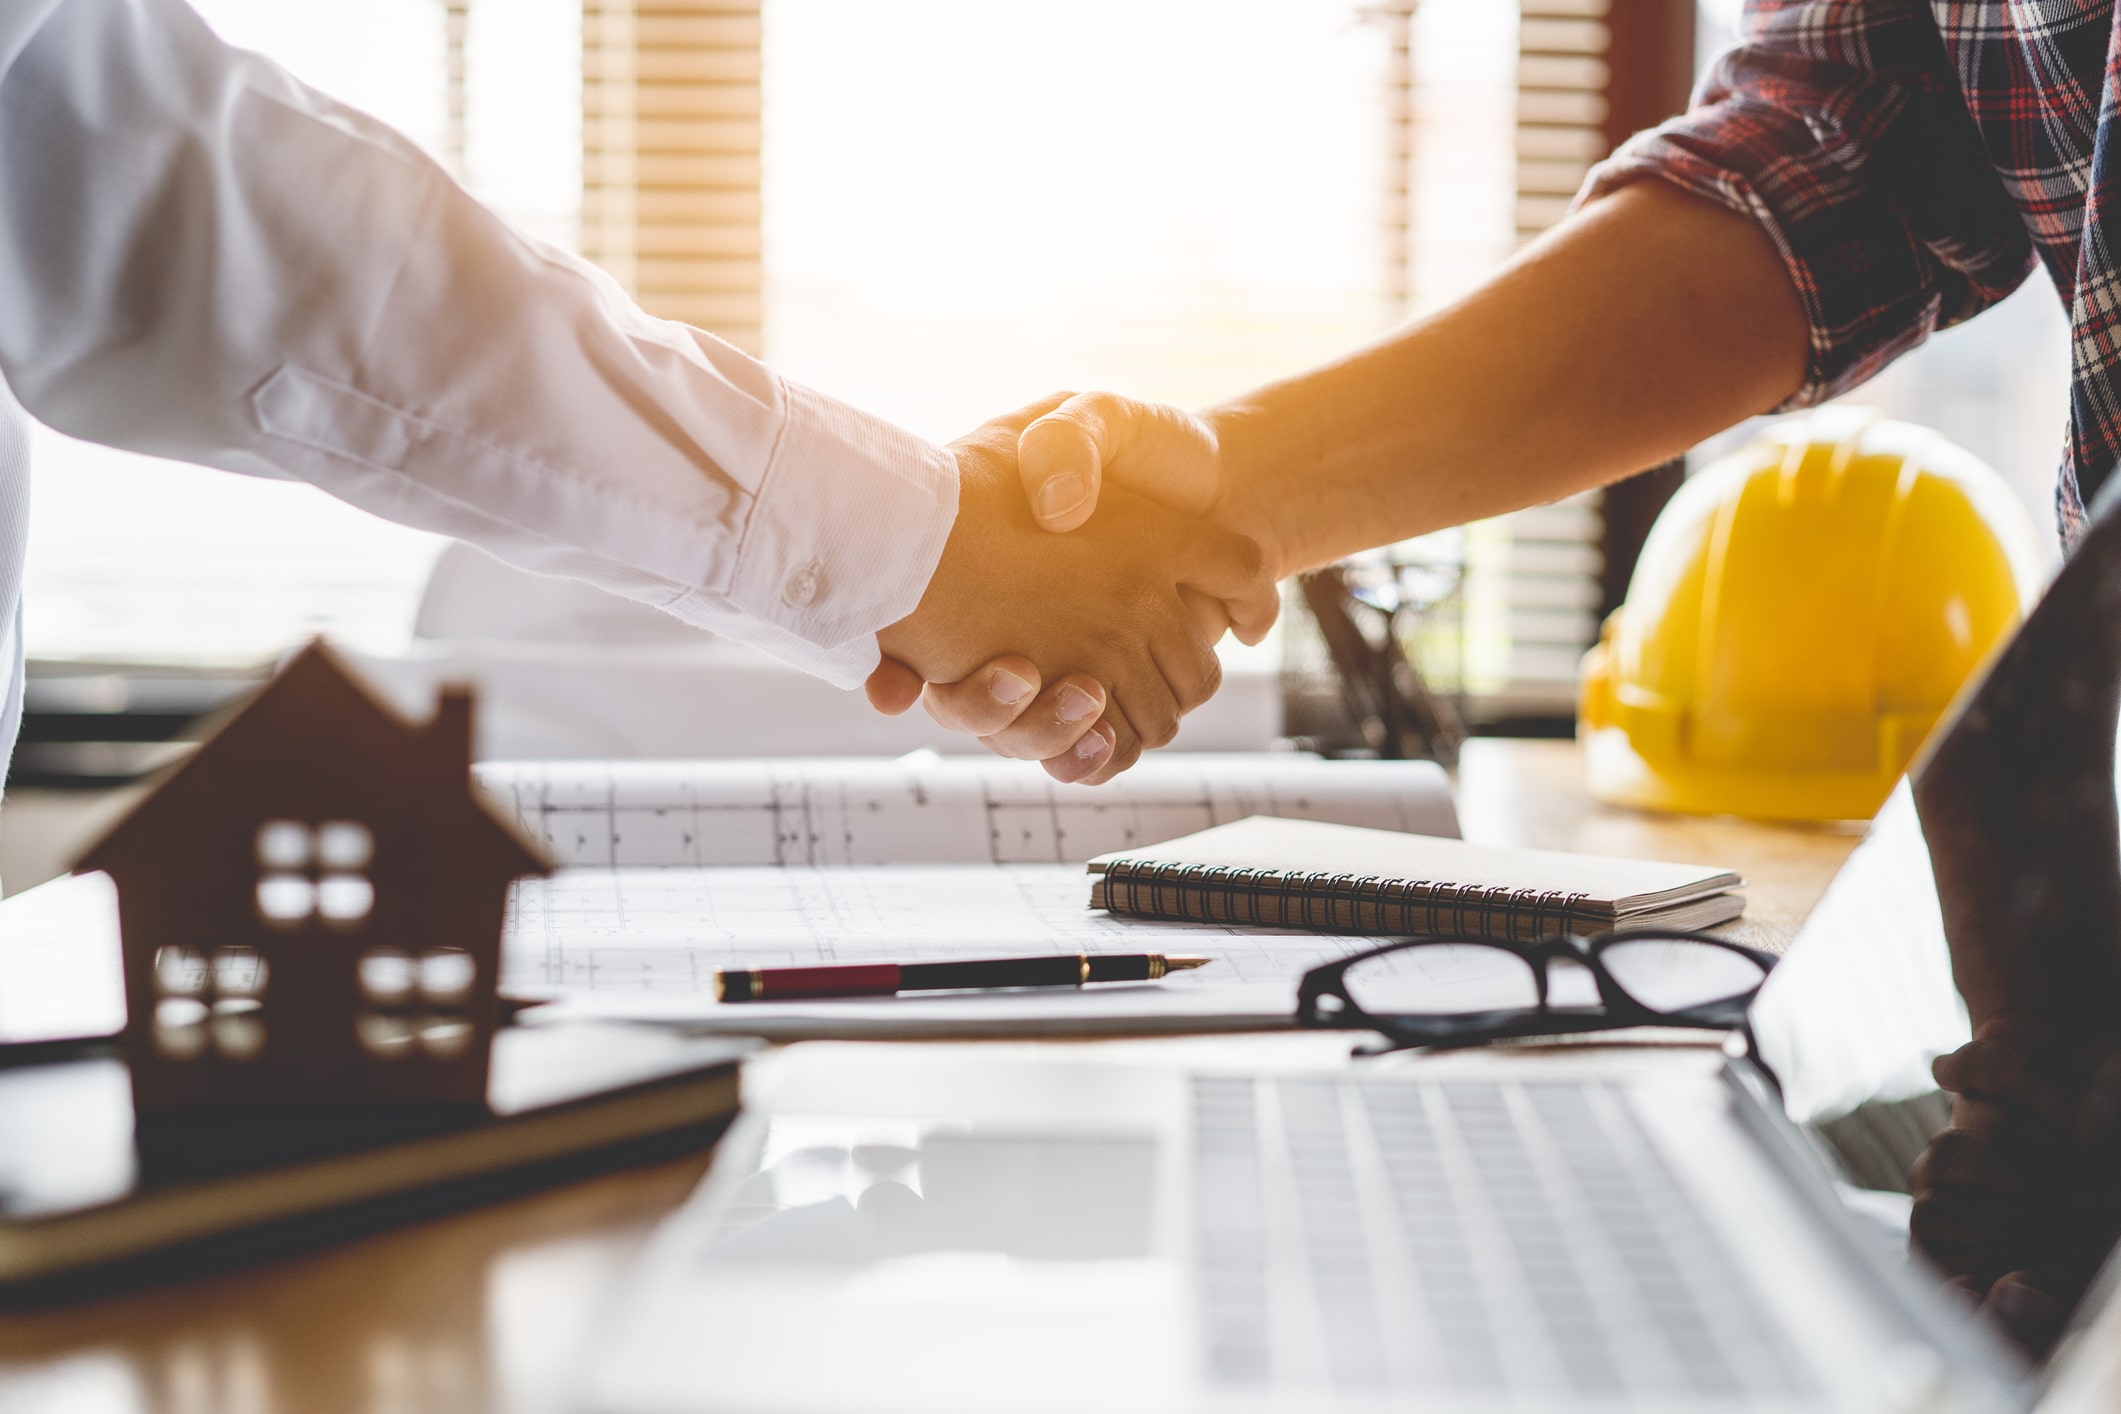 General contractor shaking hands with healthy competition